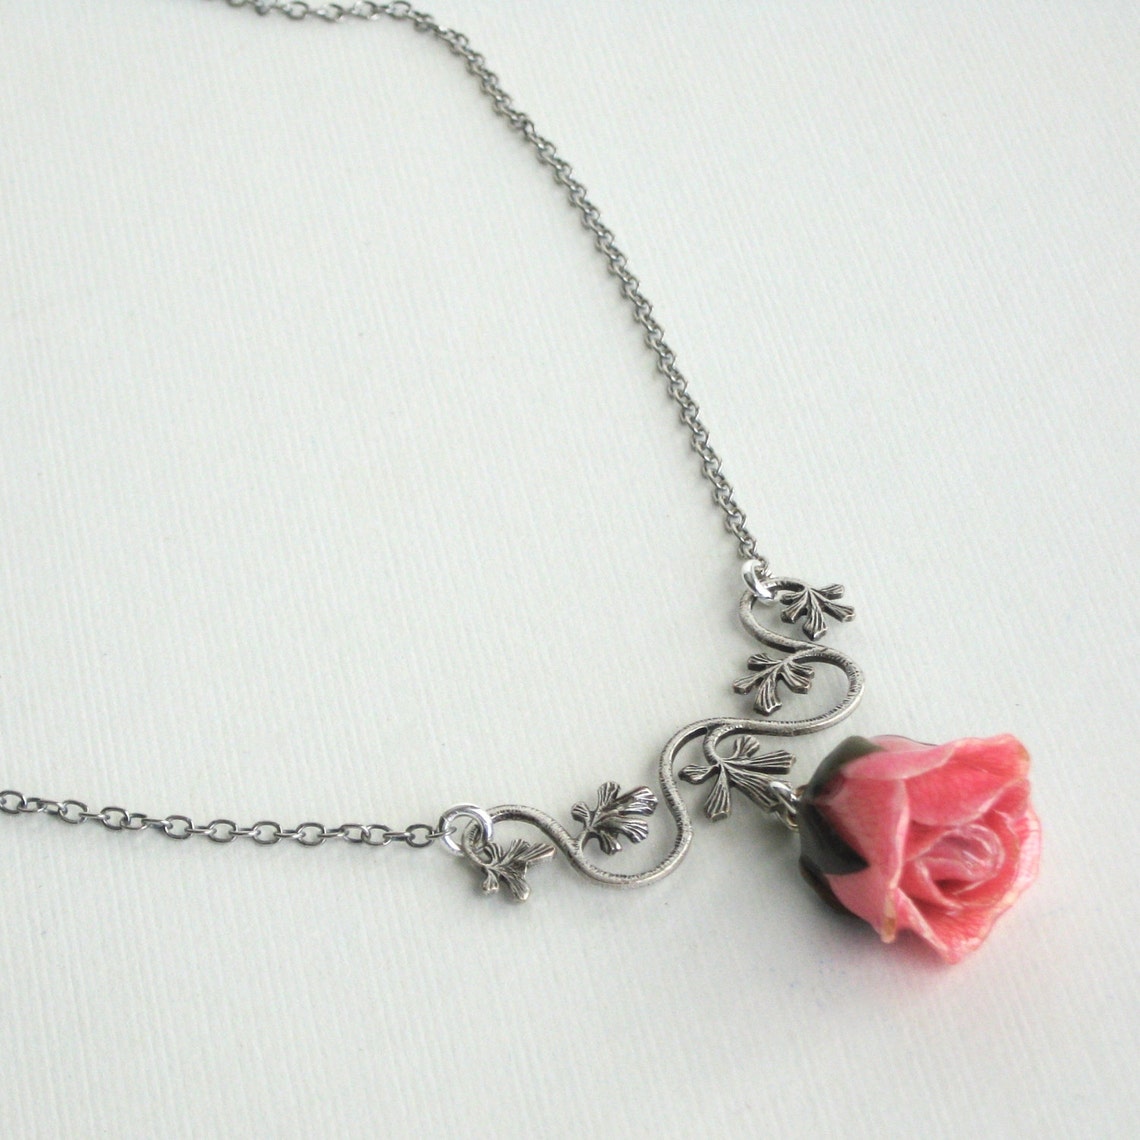 Real Pink Rosebud Necklace Real Flower Jewelry Nature - Etsy